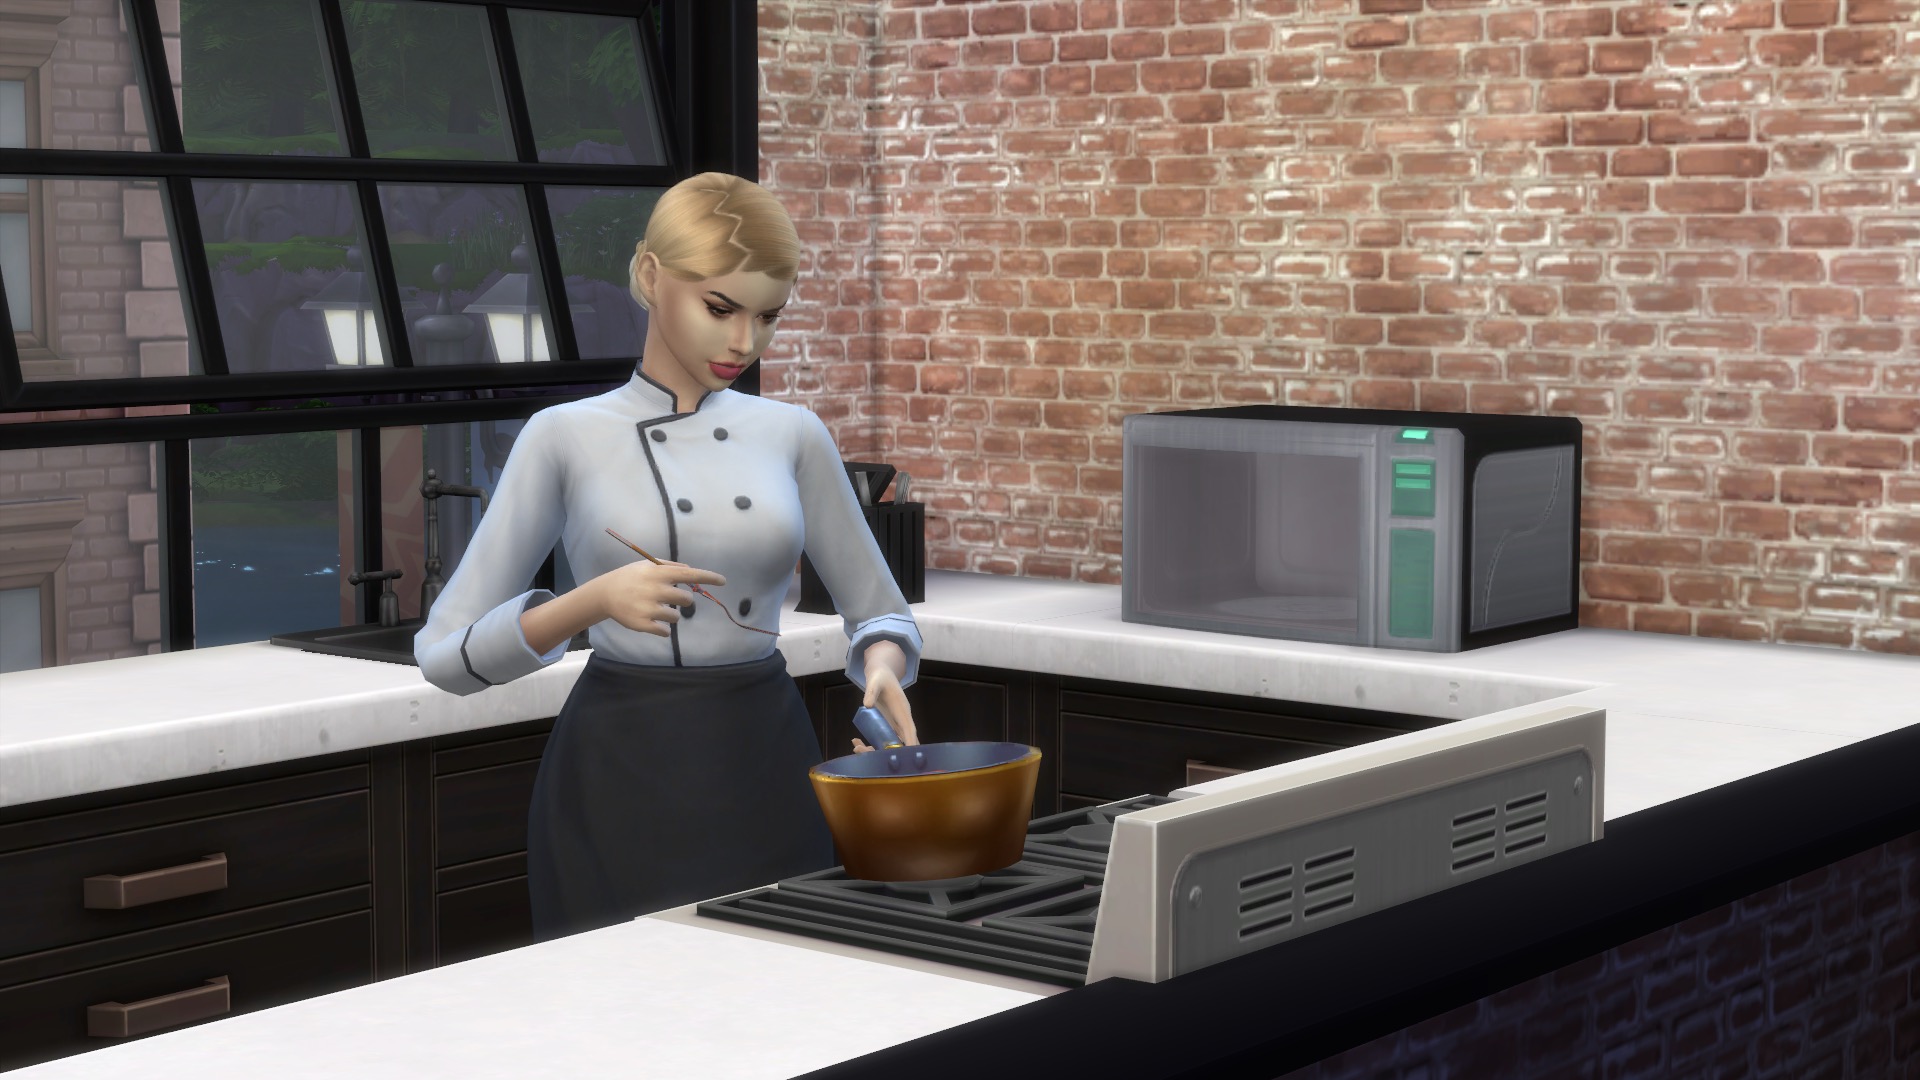 Home Chef Career By Hexesims At Mod The Sims 4 Sims 4 Updates